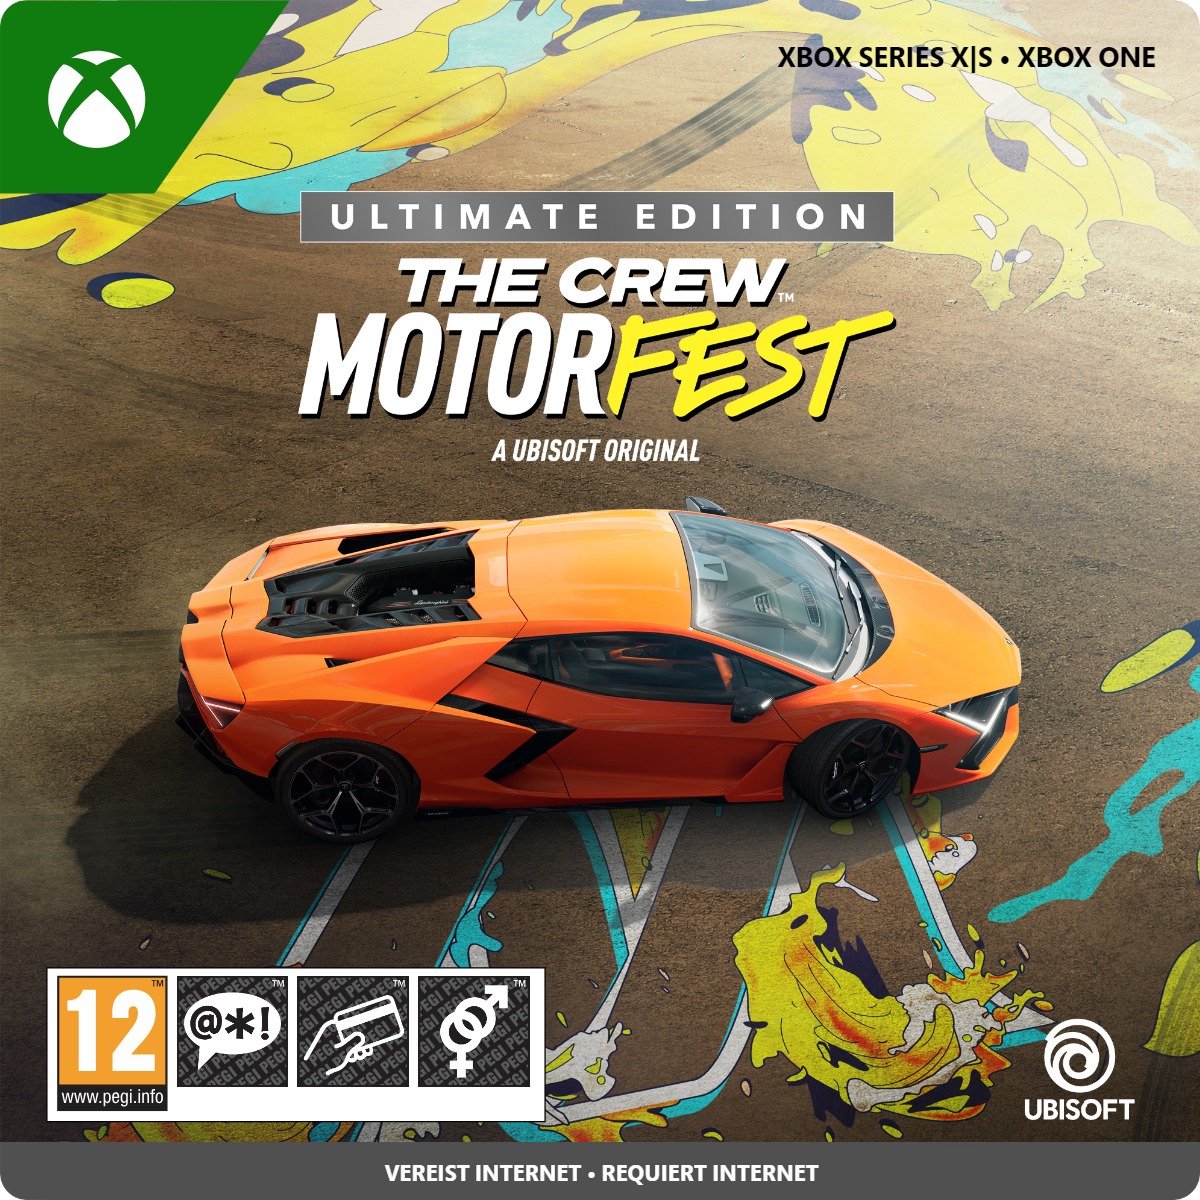 The Crew: Motorfest - Ultimate Edition (Xbox One Download) (Xbox One), Ubisoft